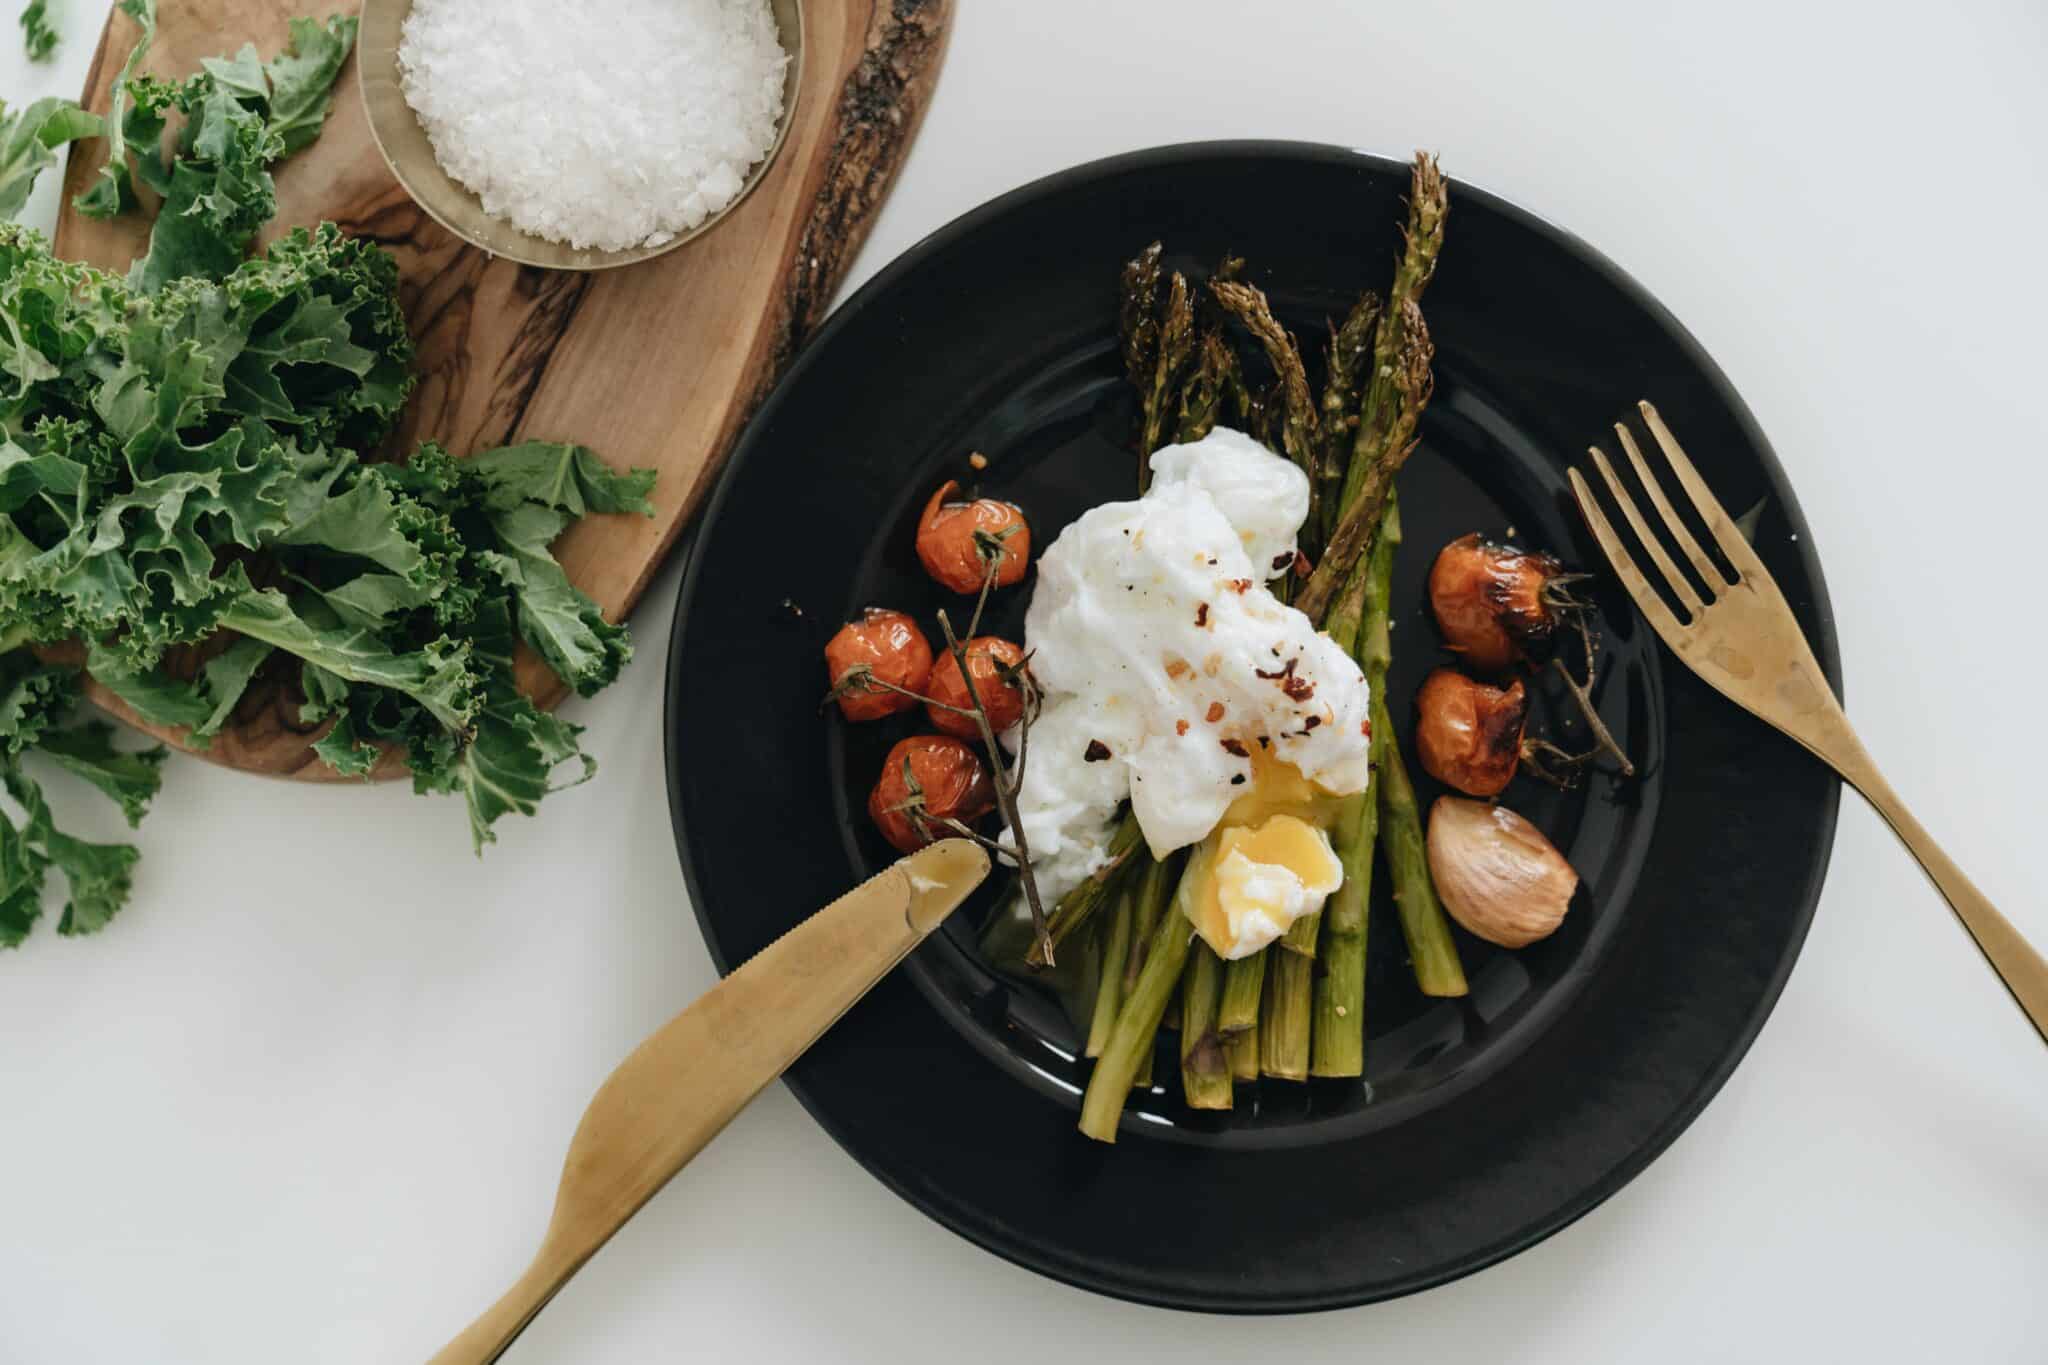 Ilustrasi Makanan Sehat/Photo by alleksana: https://www.pexels.com/photo/photo-of-poached-egg-on-top-of-asparagus-4050990/